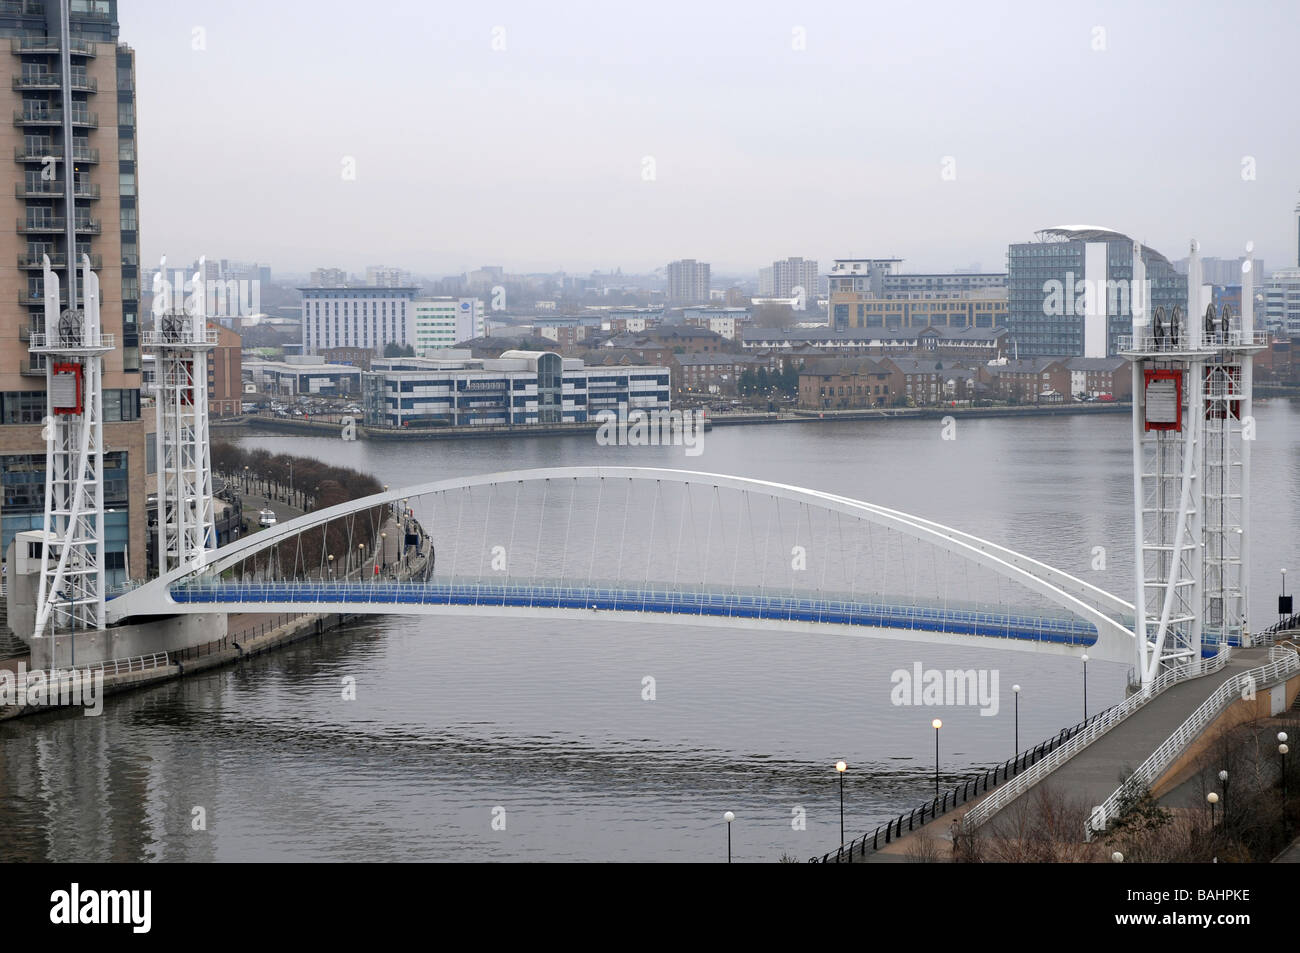 Millennium Lifting Footbridge over the Manchester Ship canal, Salford Quays, Manchester, England, UK Stock Photo